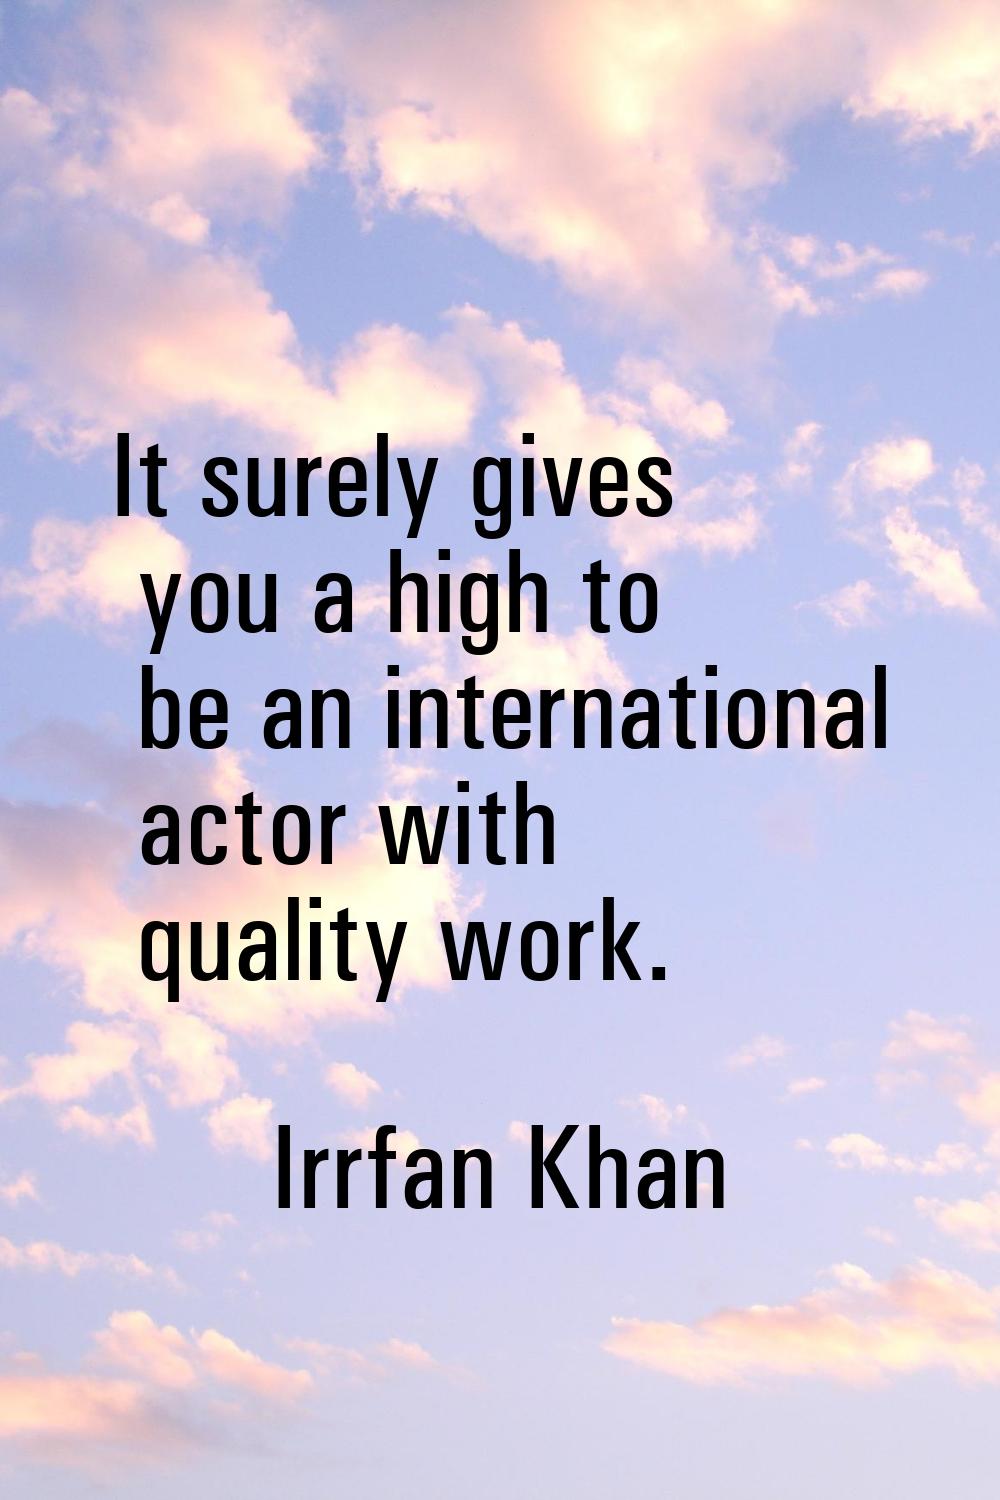 It surely gives you a high to be an international actor with quality work.